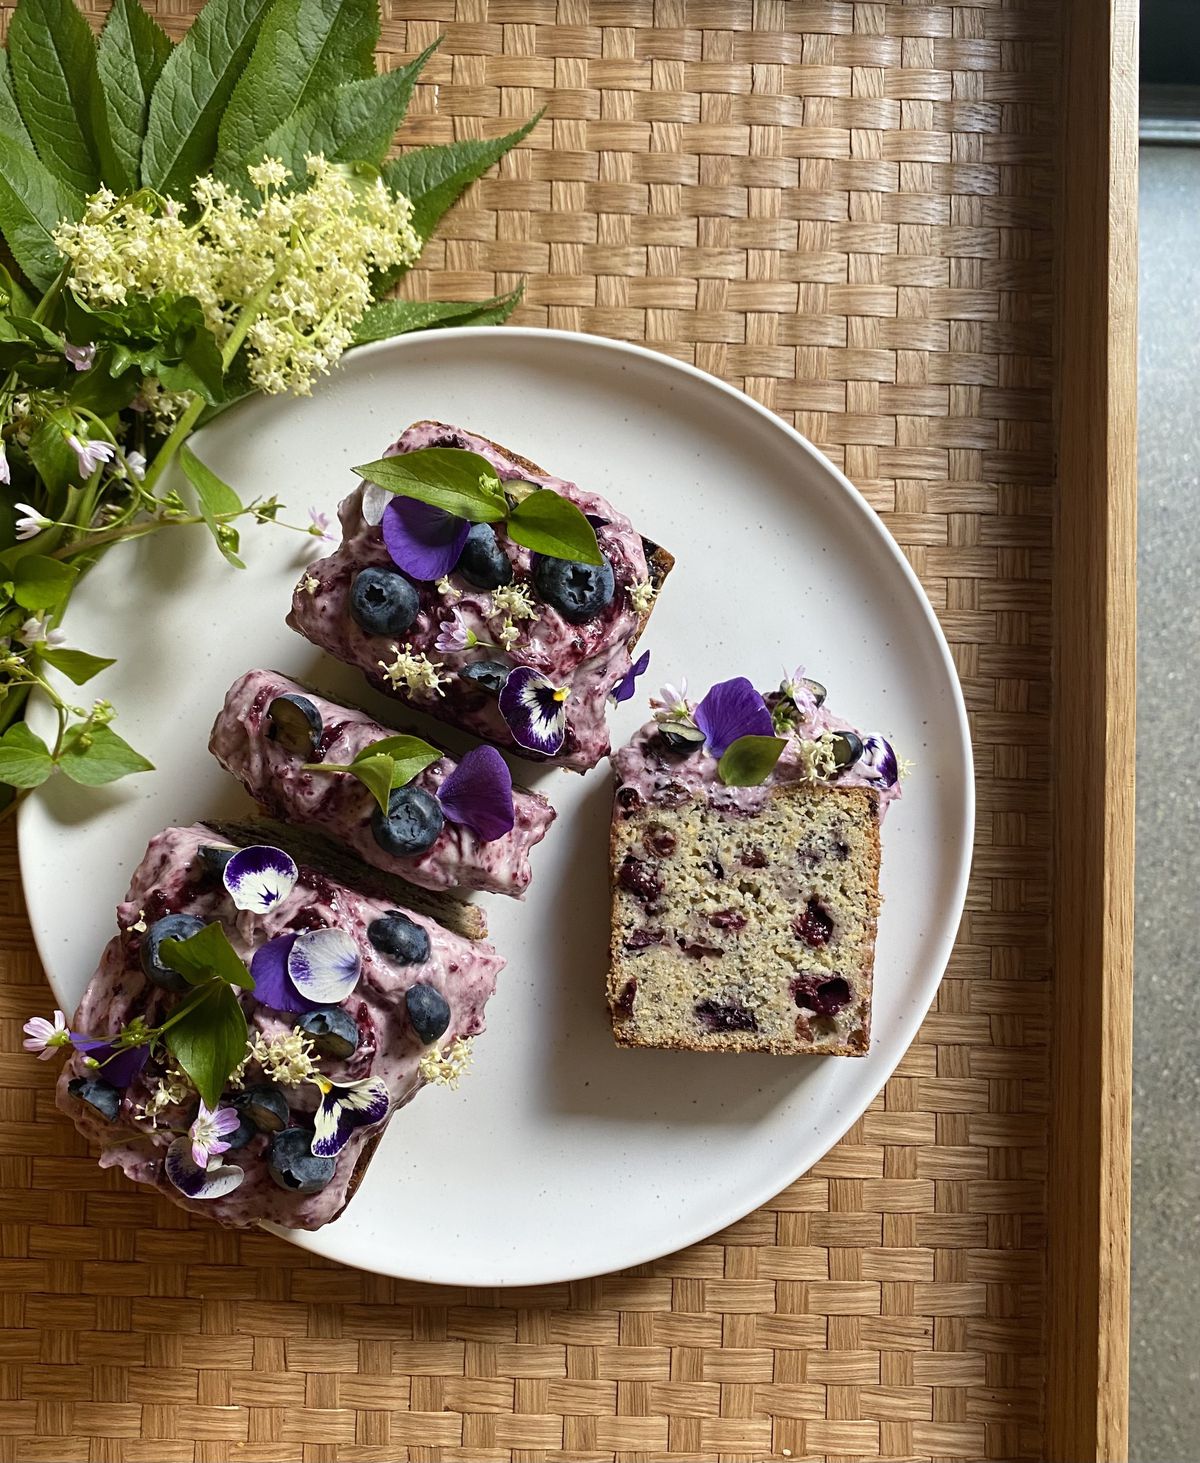 From above, a loaf cake topped with purple icing, whole blueberries, and sprigs of herbs.